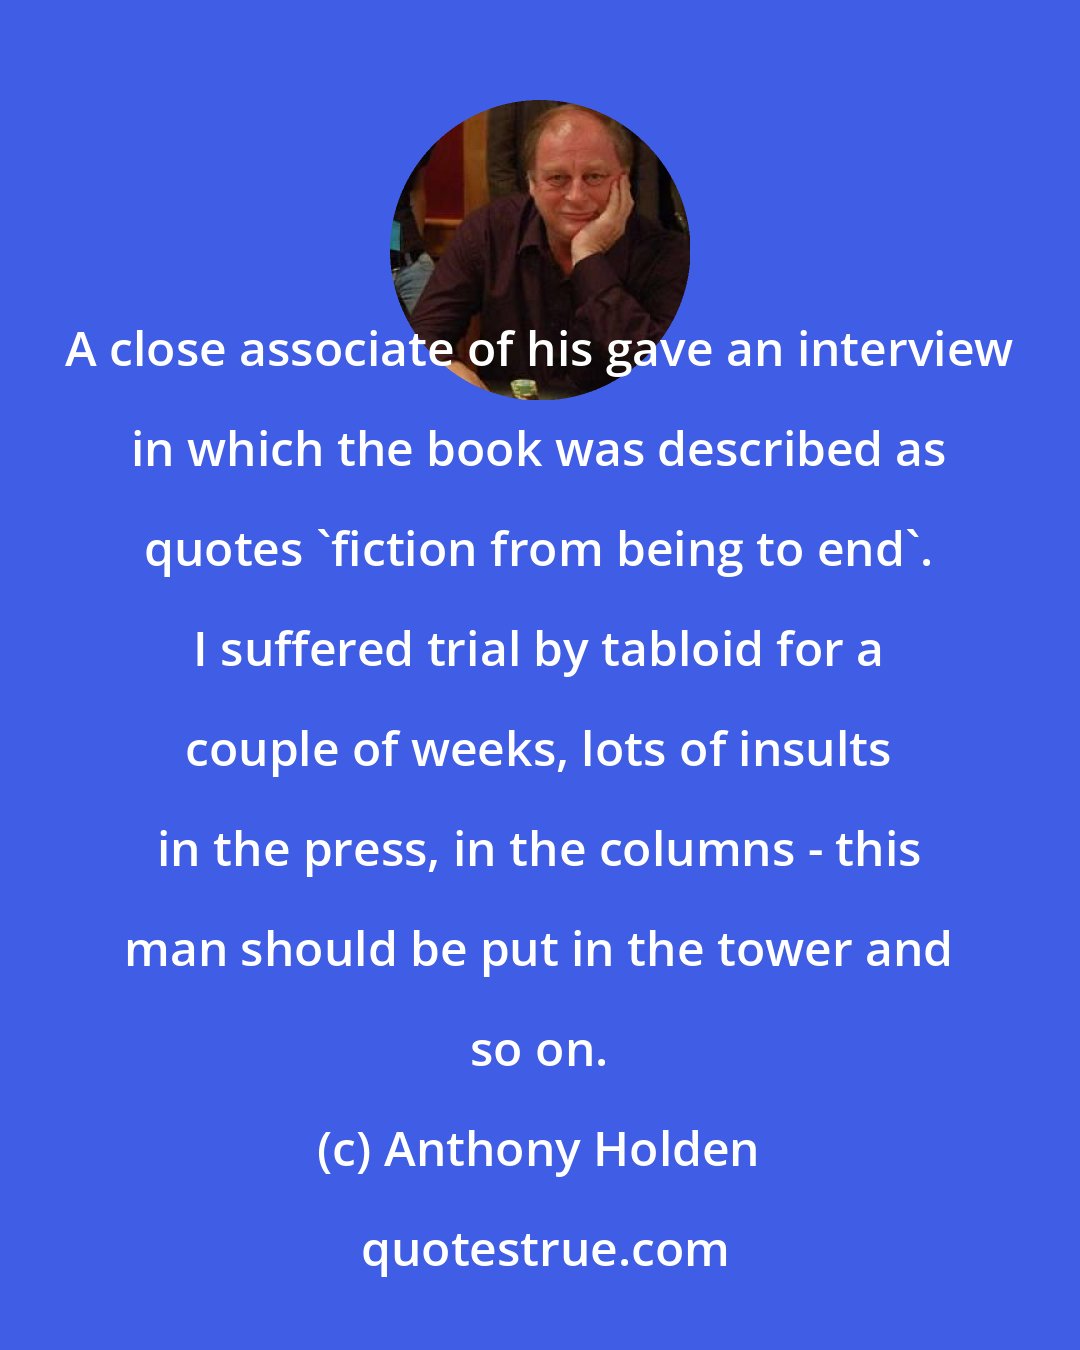 Anthony Holden: A close associate of his gave an interview in which the book was described as quotes 'fiction from being to end'. I suffered trial by tabloid for a couple of weeks, lots of insults in the press, in the columns - this man should be put in the tower and so on.